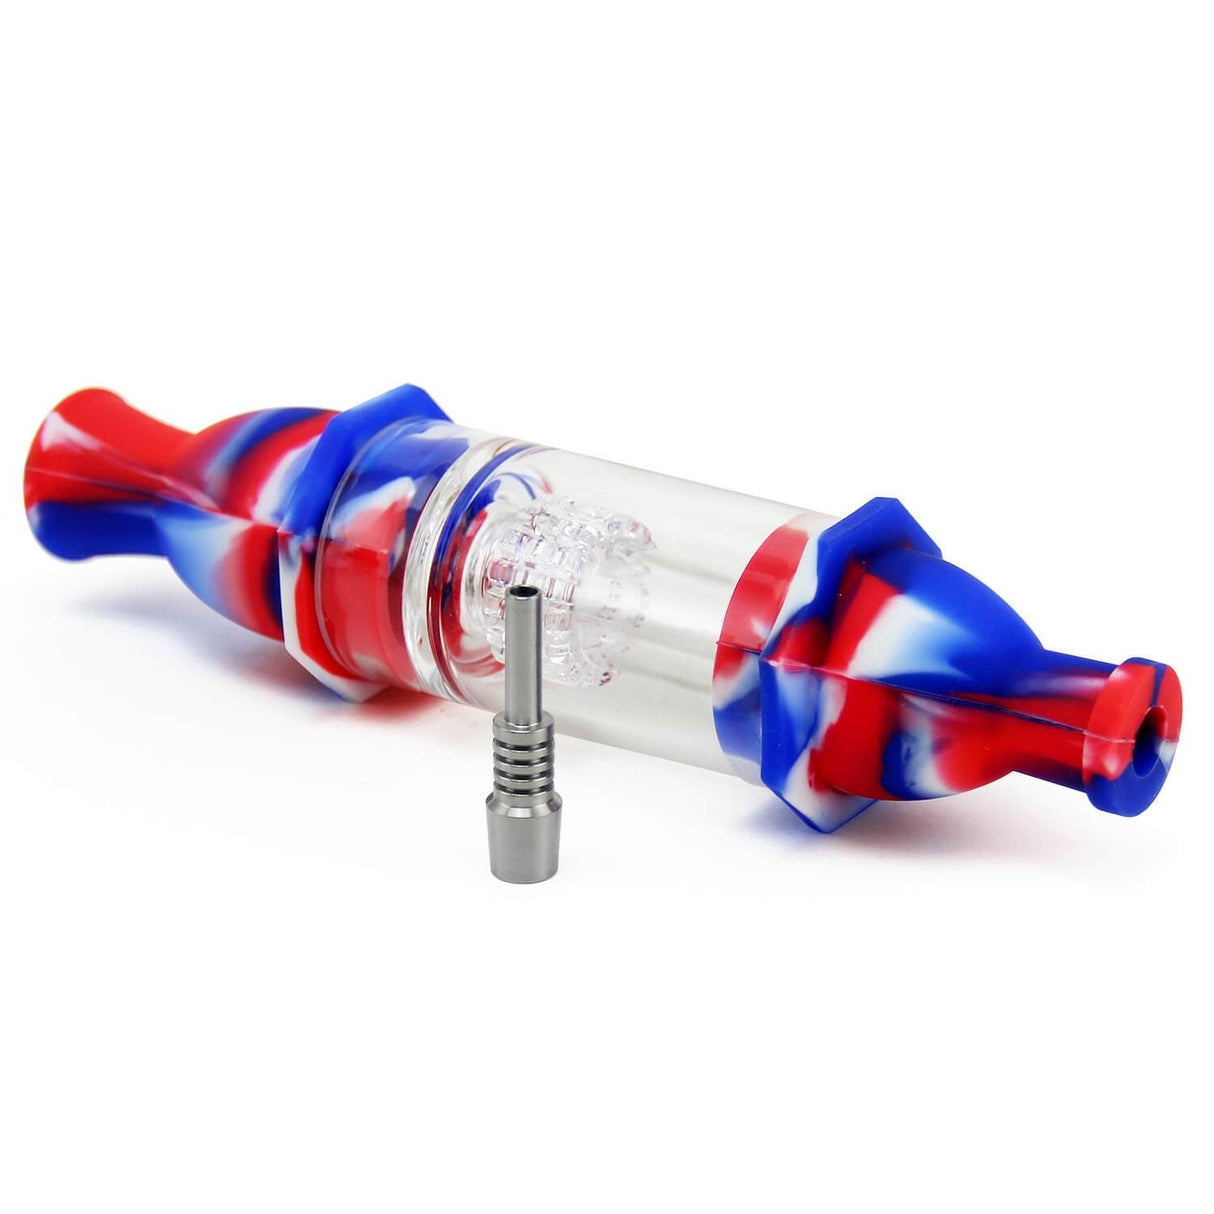 PILOT DIARY Honey Straw with Water Filtering in Red, White, and Blue - Side View